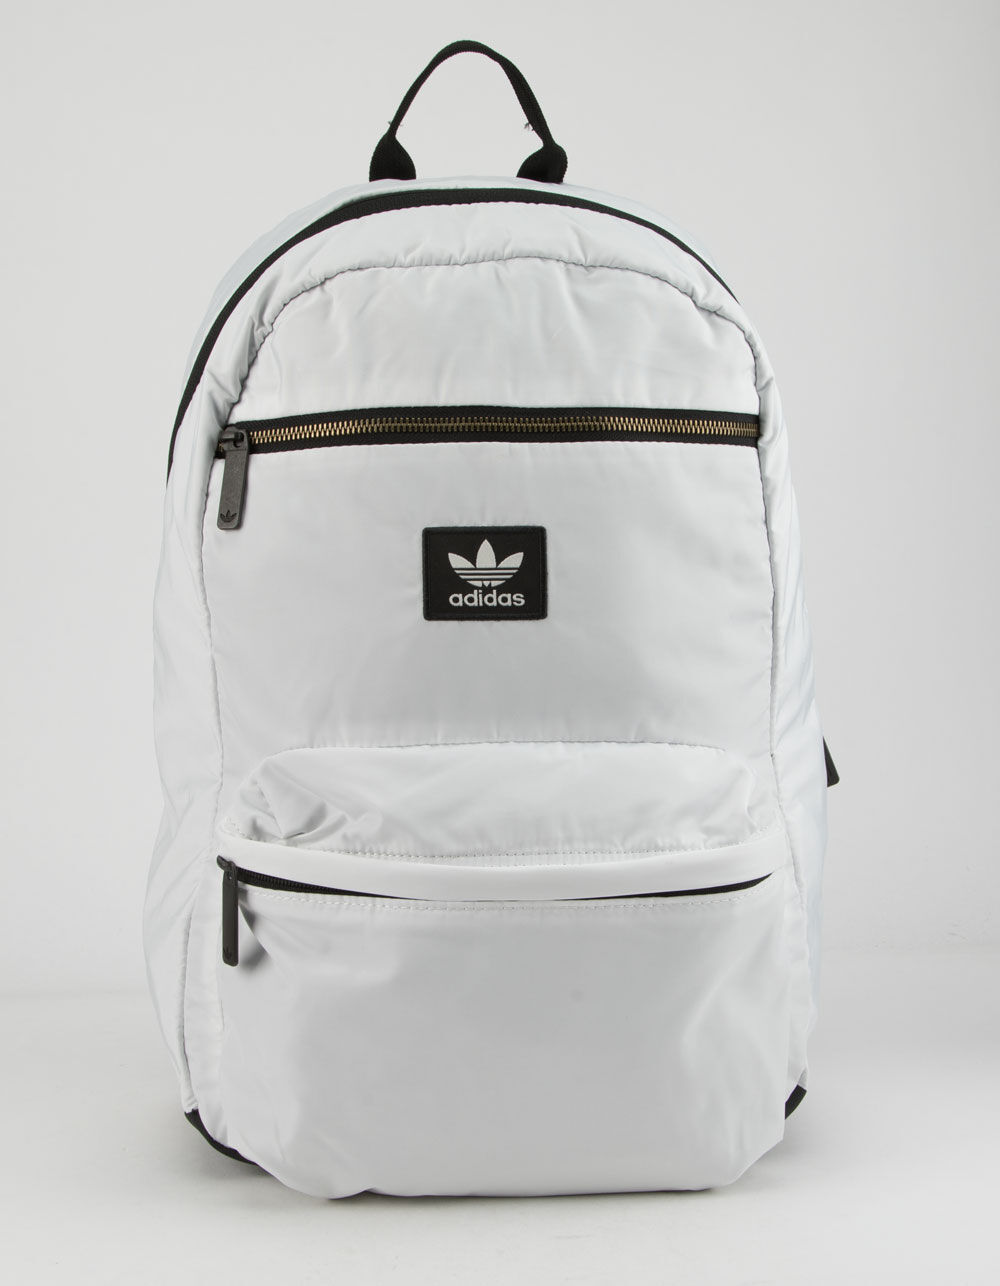 ADIDAS Originals National Plus White Backpack - WHITE COMBO | Tillys